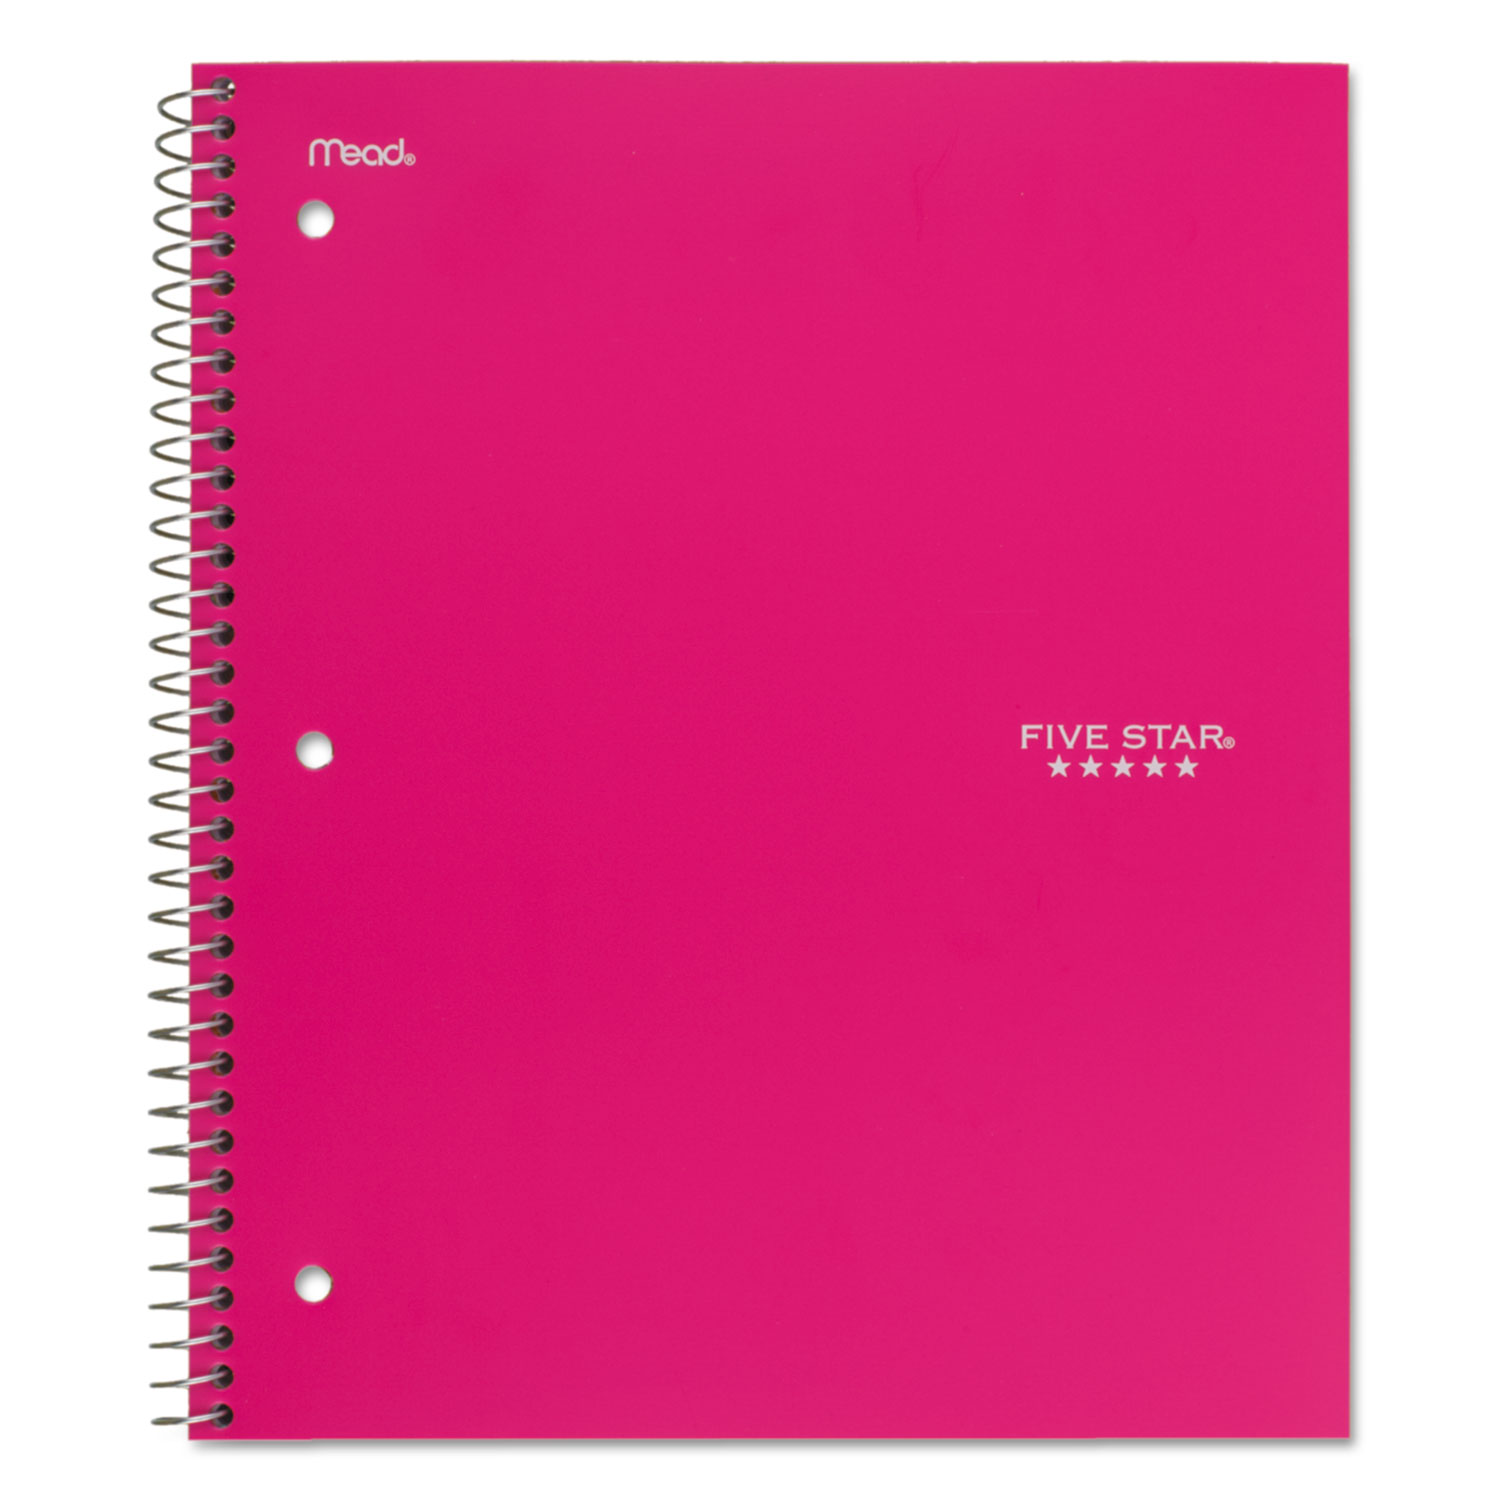  Five Star 06112 Trend Wirebound Notebook, 5 Subjects, Medium/College Rule, Assorted Color Covers, 11 x 8.5, 200 Sheets (MEA06112) 